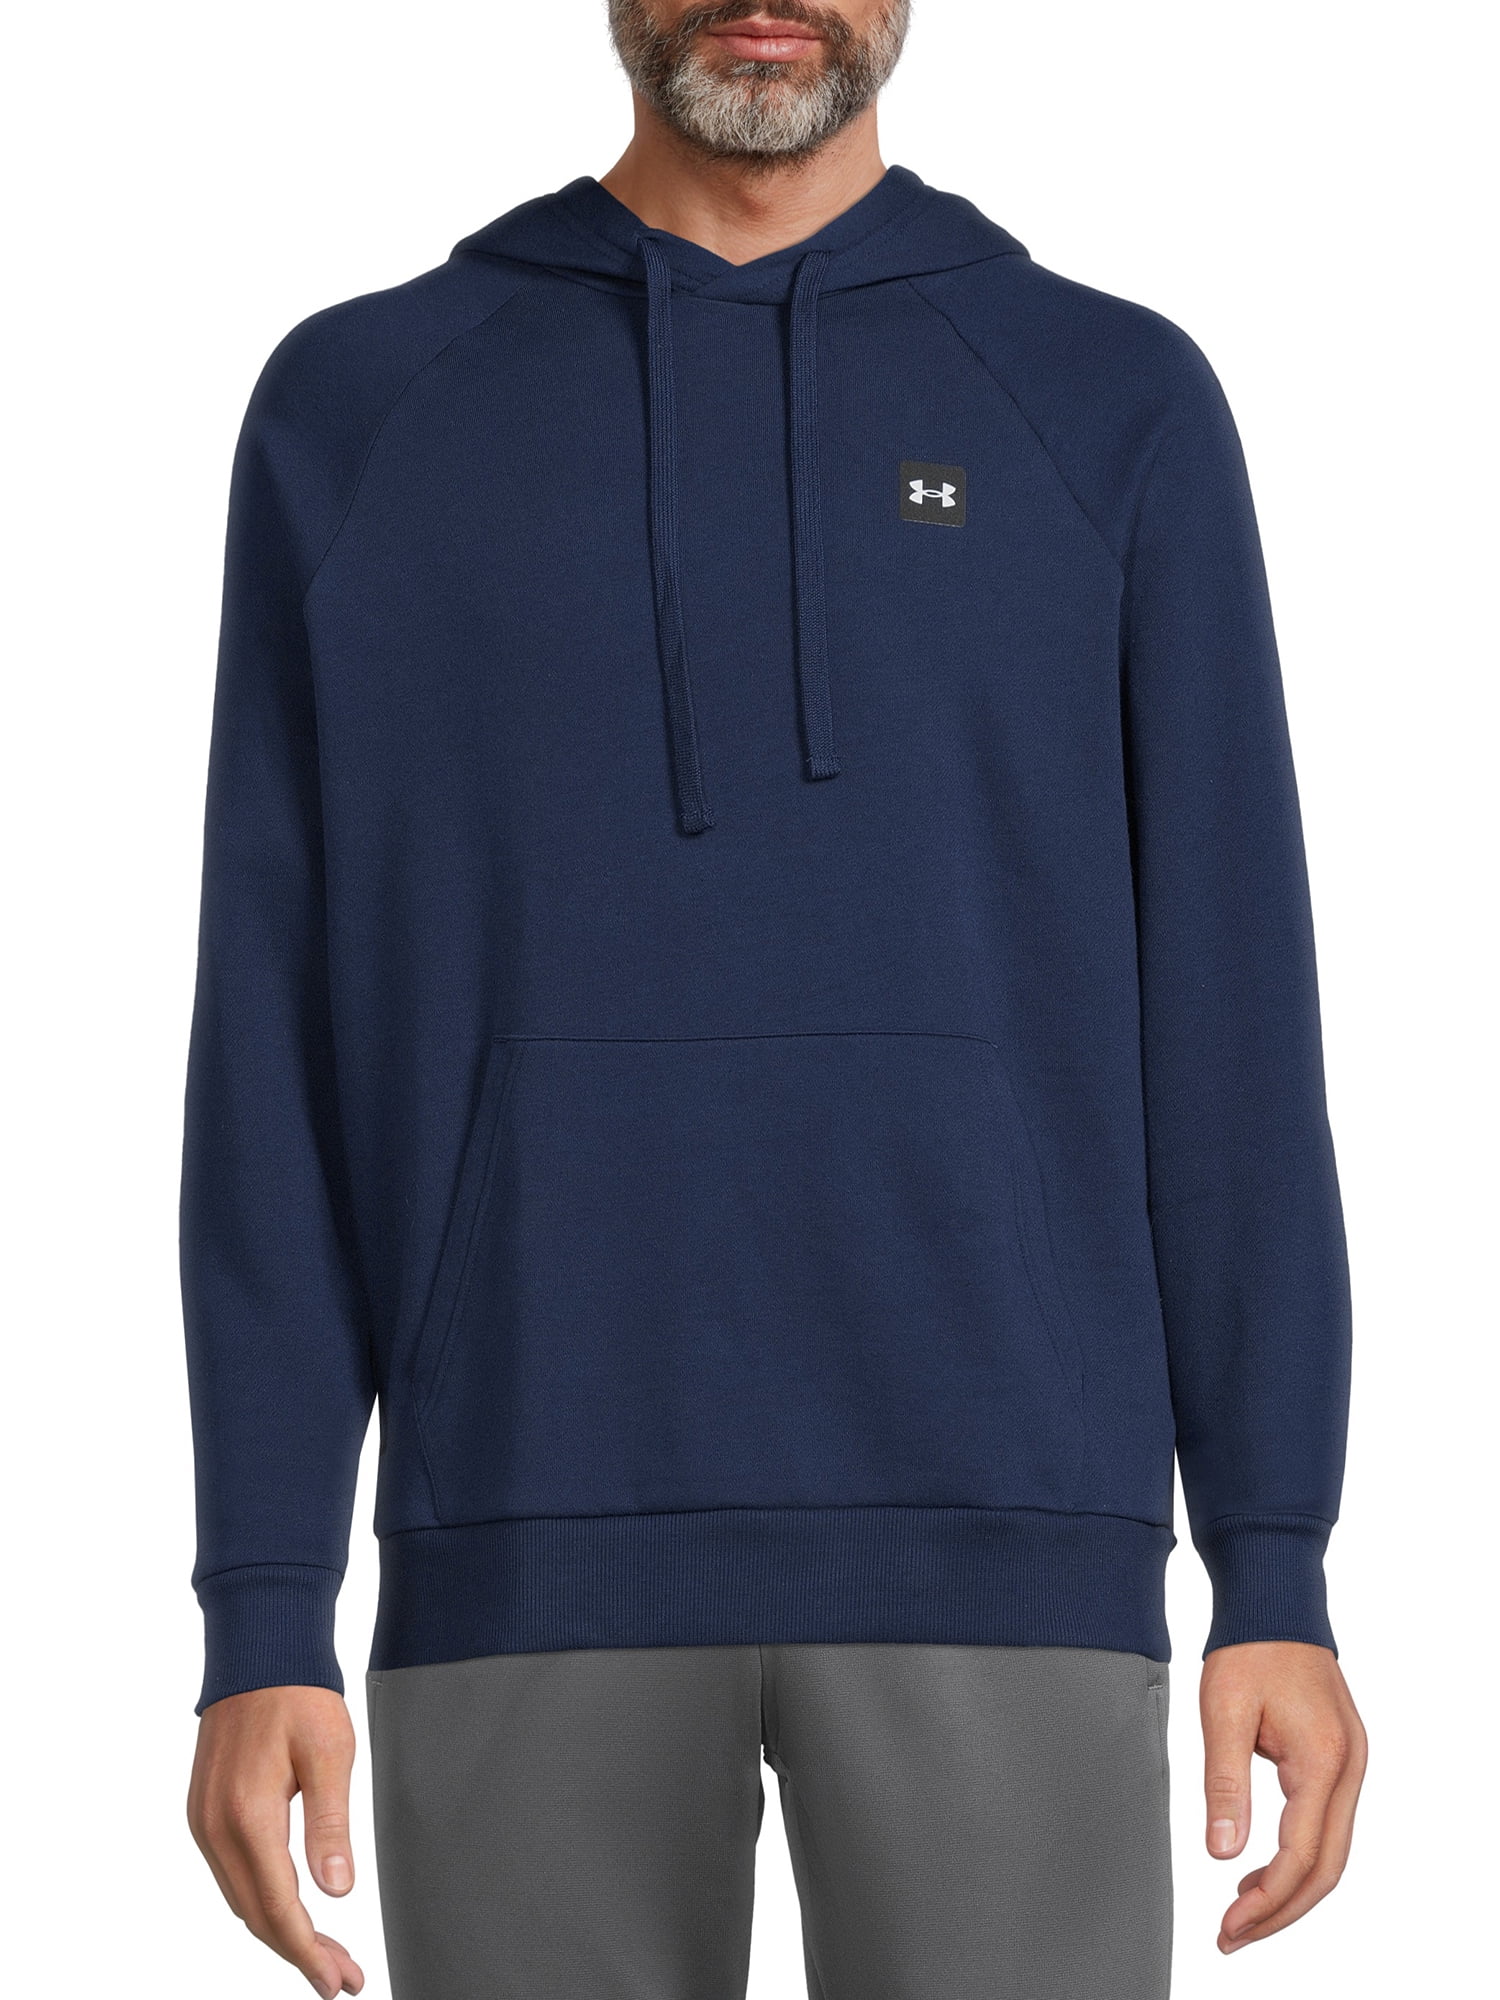 Under Armour Men's and Big Men's UA Rival Fleece Hoodie, Sizes up to ...